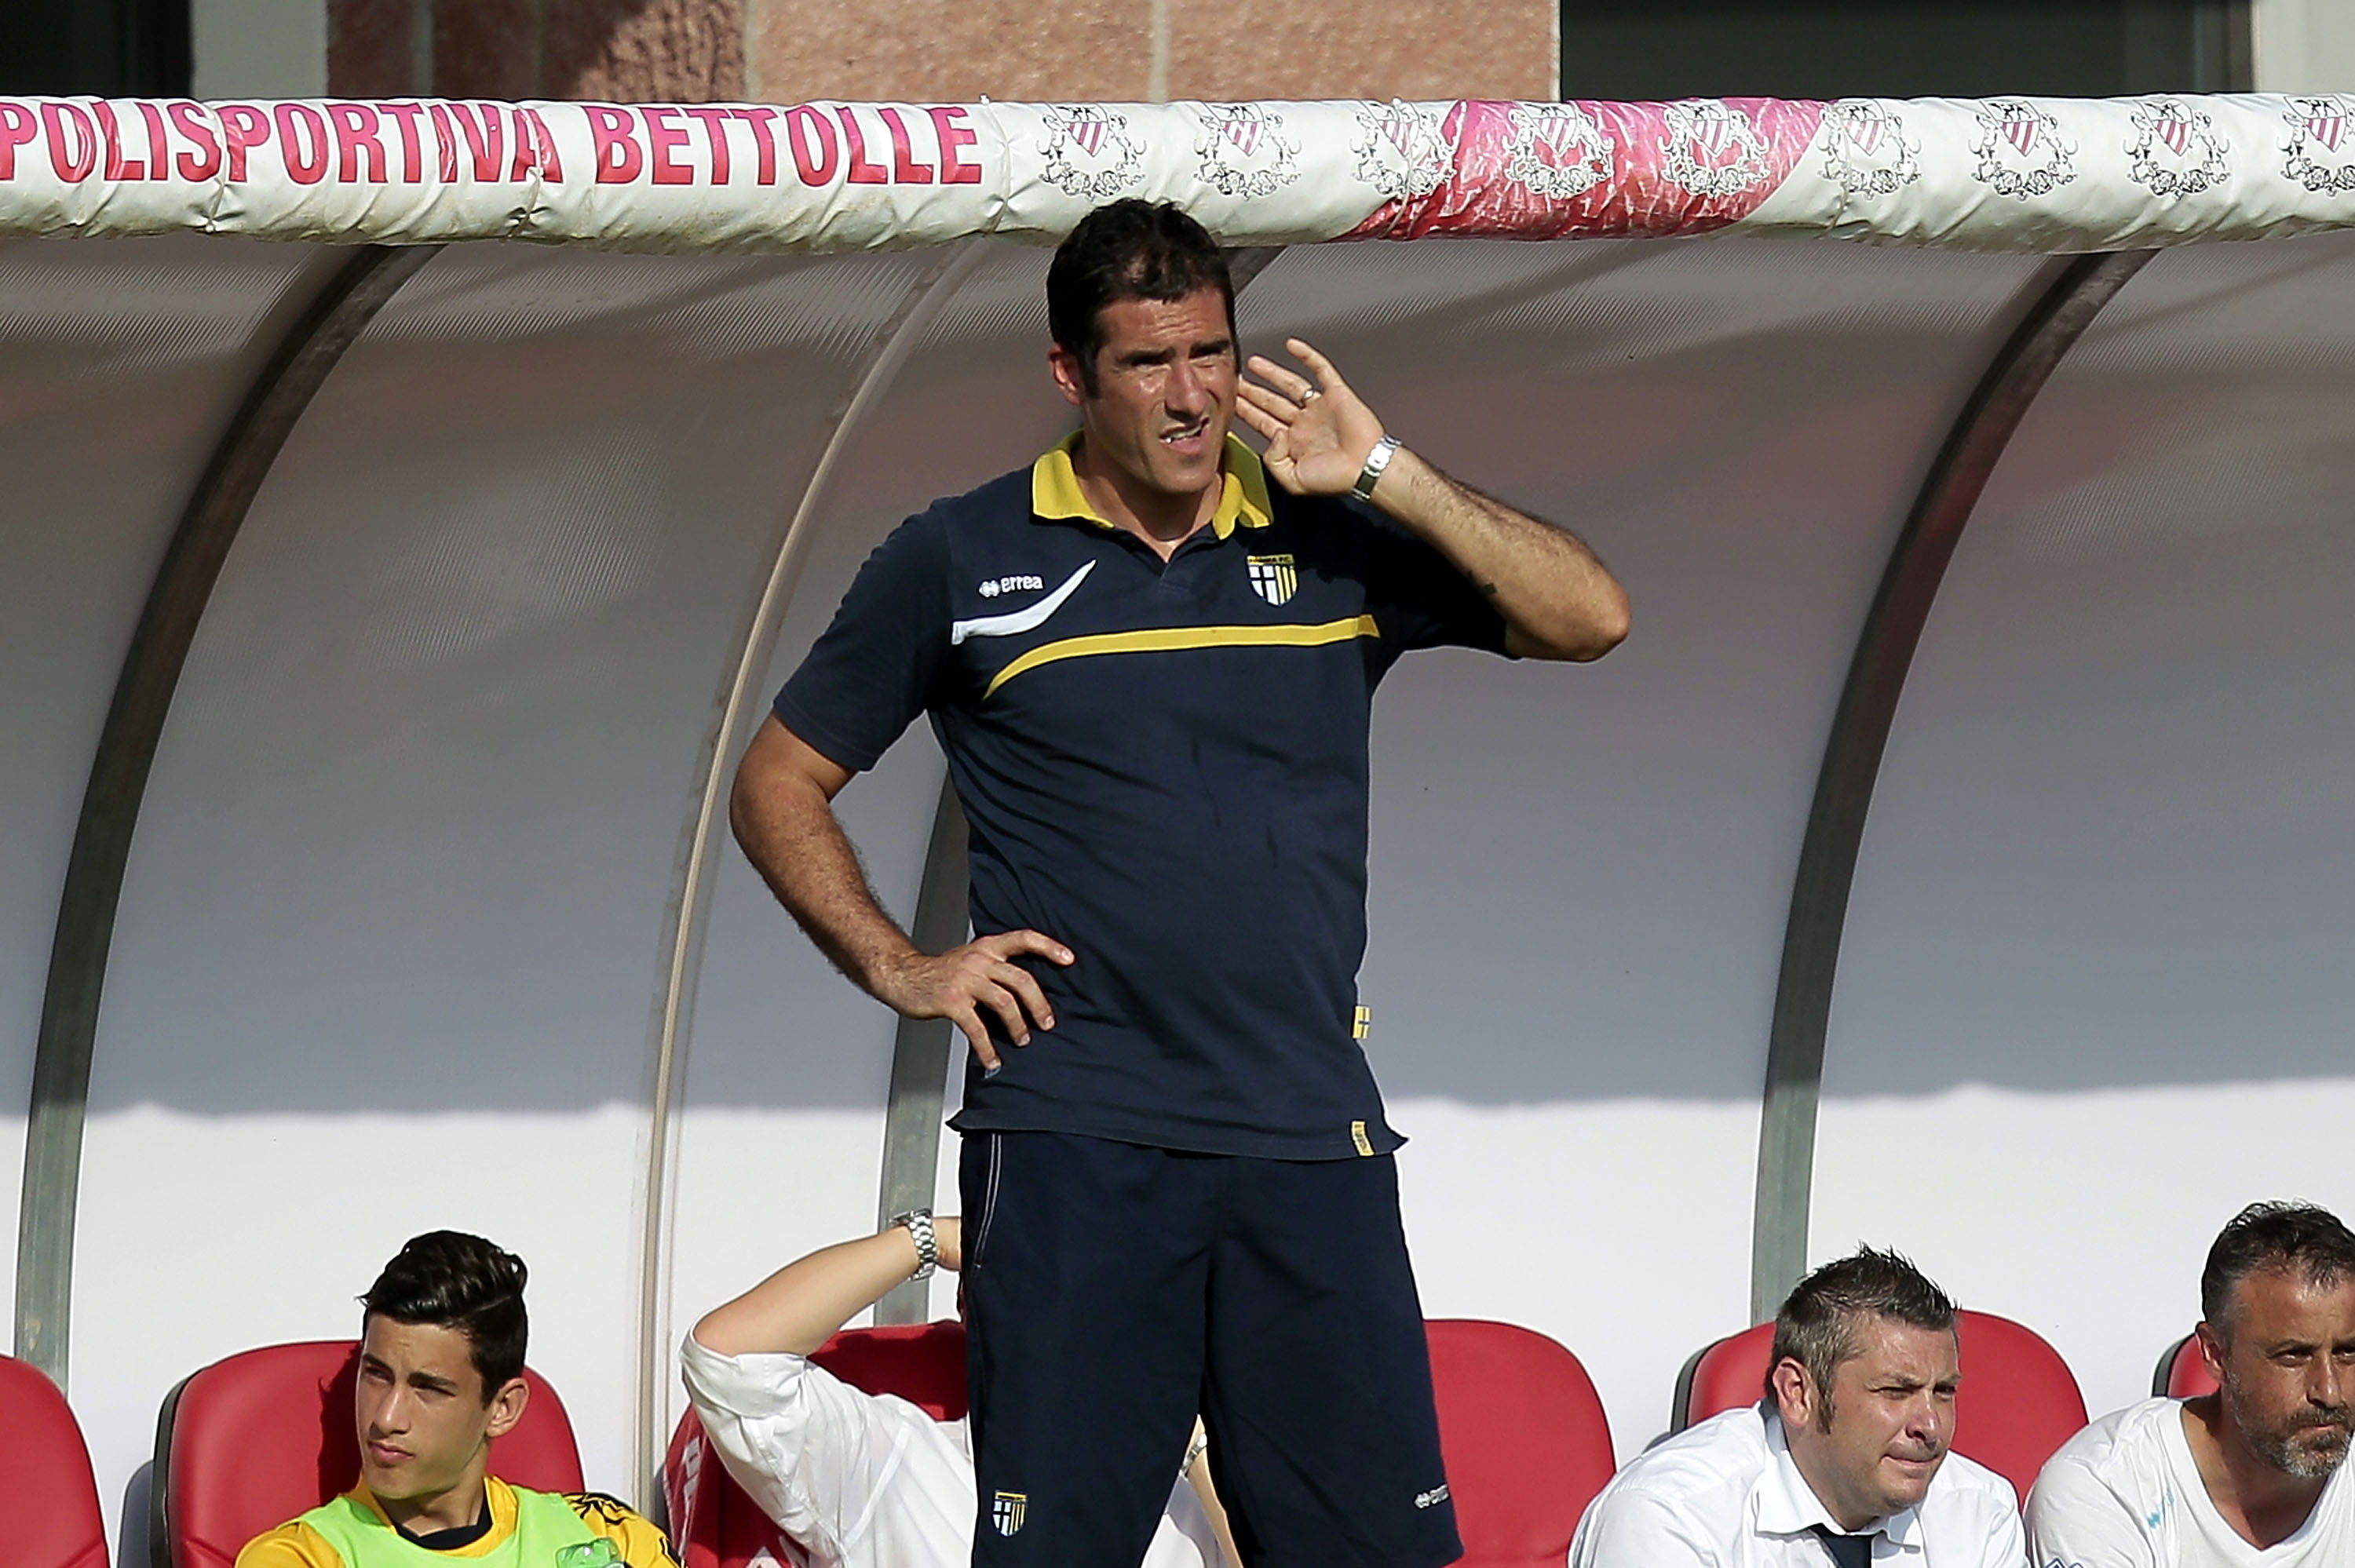 SINALUNGA, ITALY - JUNE 21: Parma head coach Cristiano Lucarelli shouts instructions to his players during the Allievi Nazionali supercup match between FC Parma and UC AlbinoLeffe on June 21, 2013 in Sinalunga, Italy.  (Photo by Gabriele Maltinti/Getty Images)